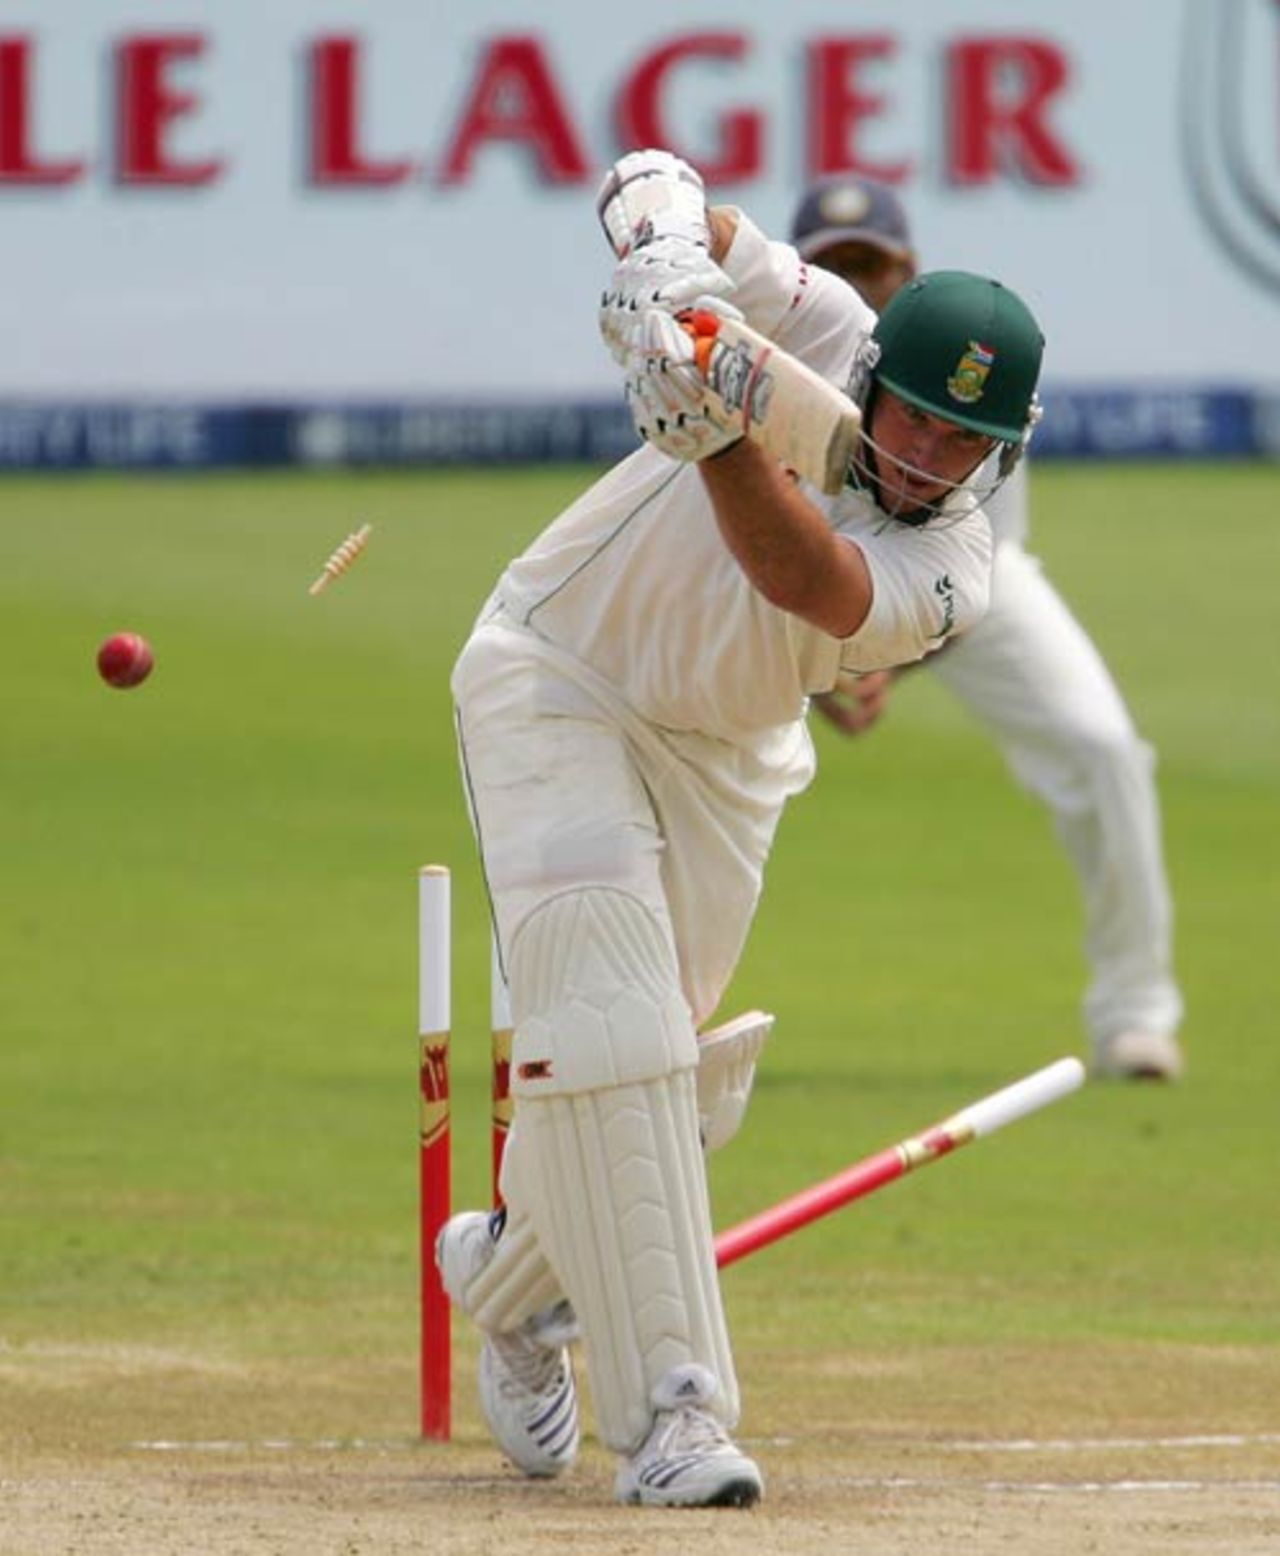 Graeme Smith is bowled by Sreesanth, South Africa v India, 2nd Test, Durban, 4th day, December 29, 2006